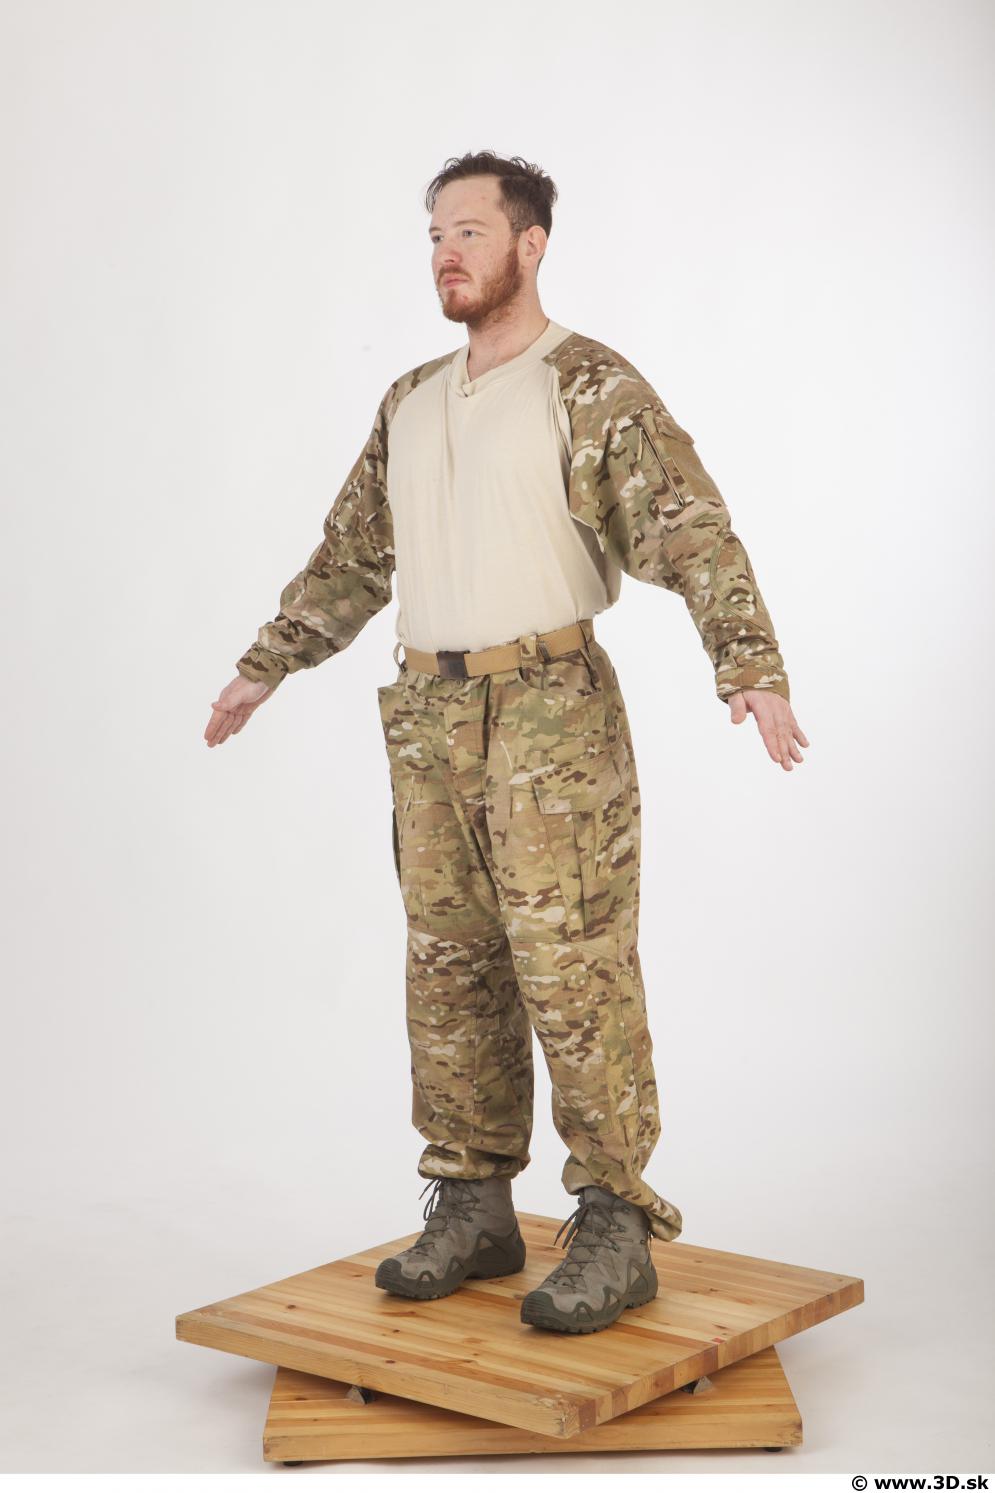 Image from Free Samples / May 2018 - 0003_soldier_in_american_army_military_uniform_0003.jpg